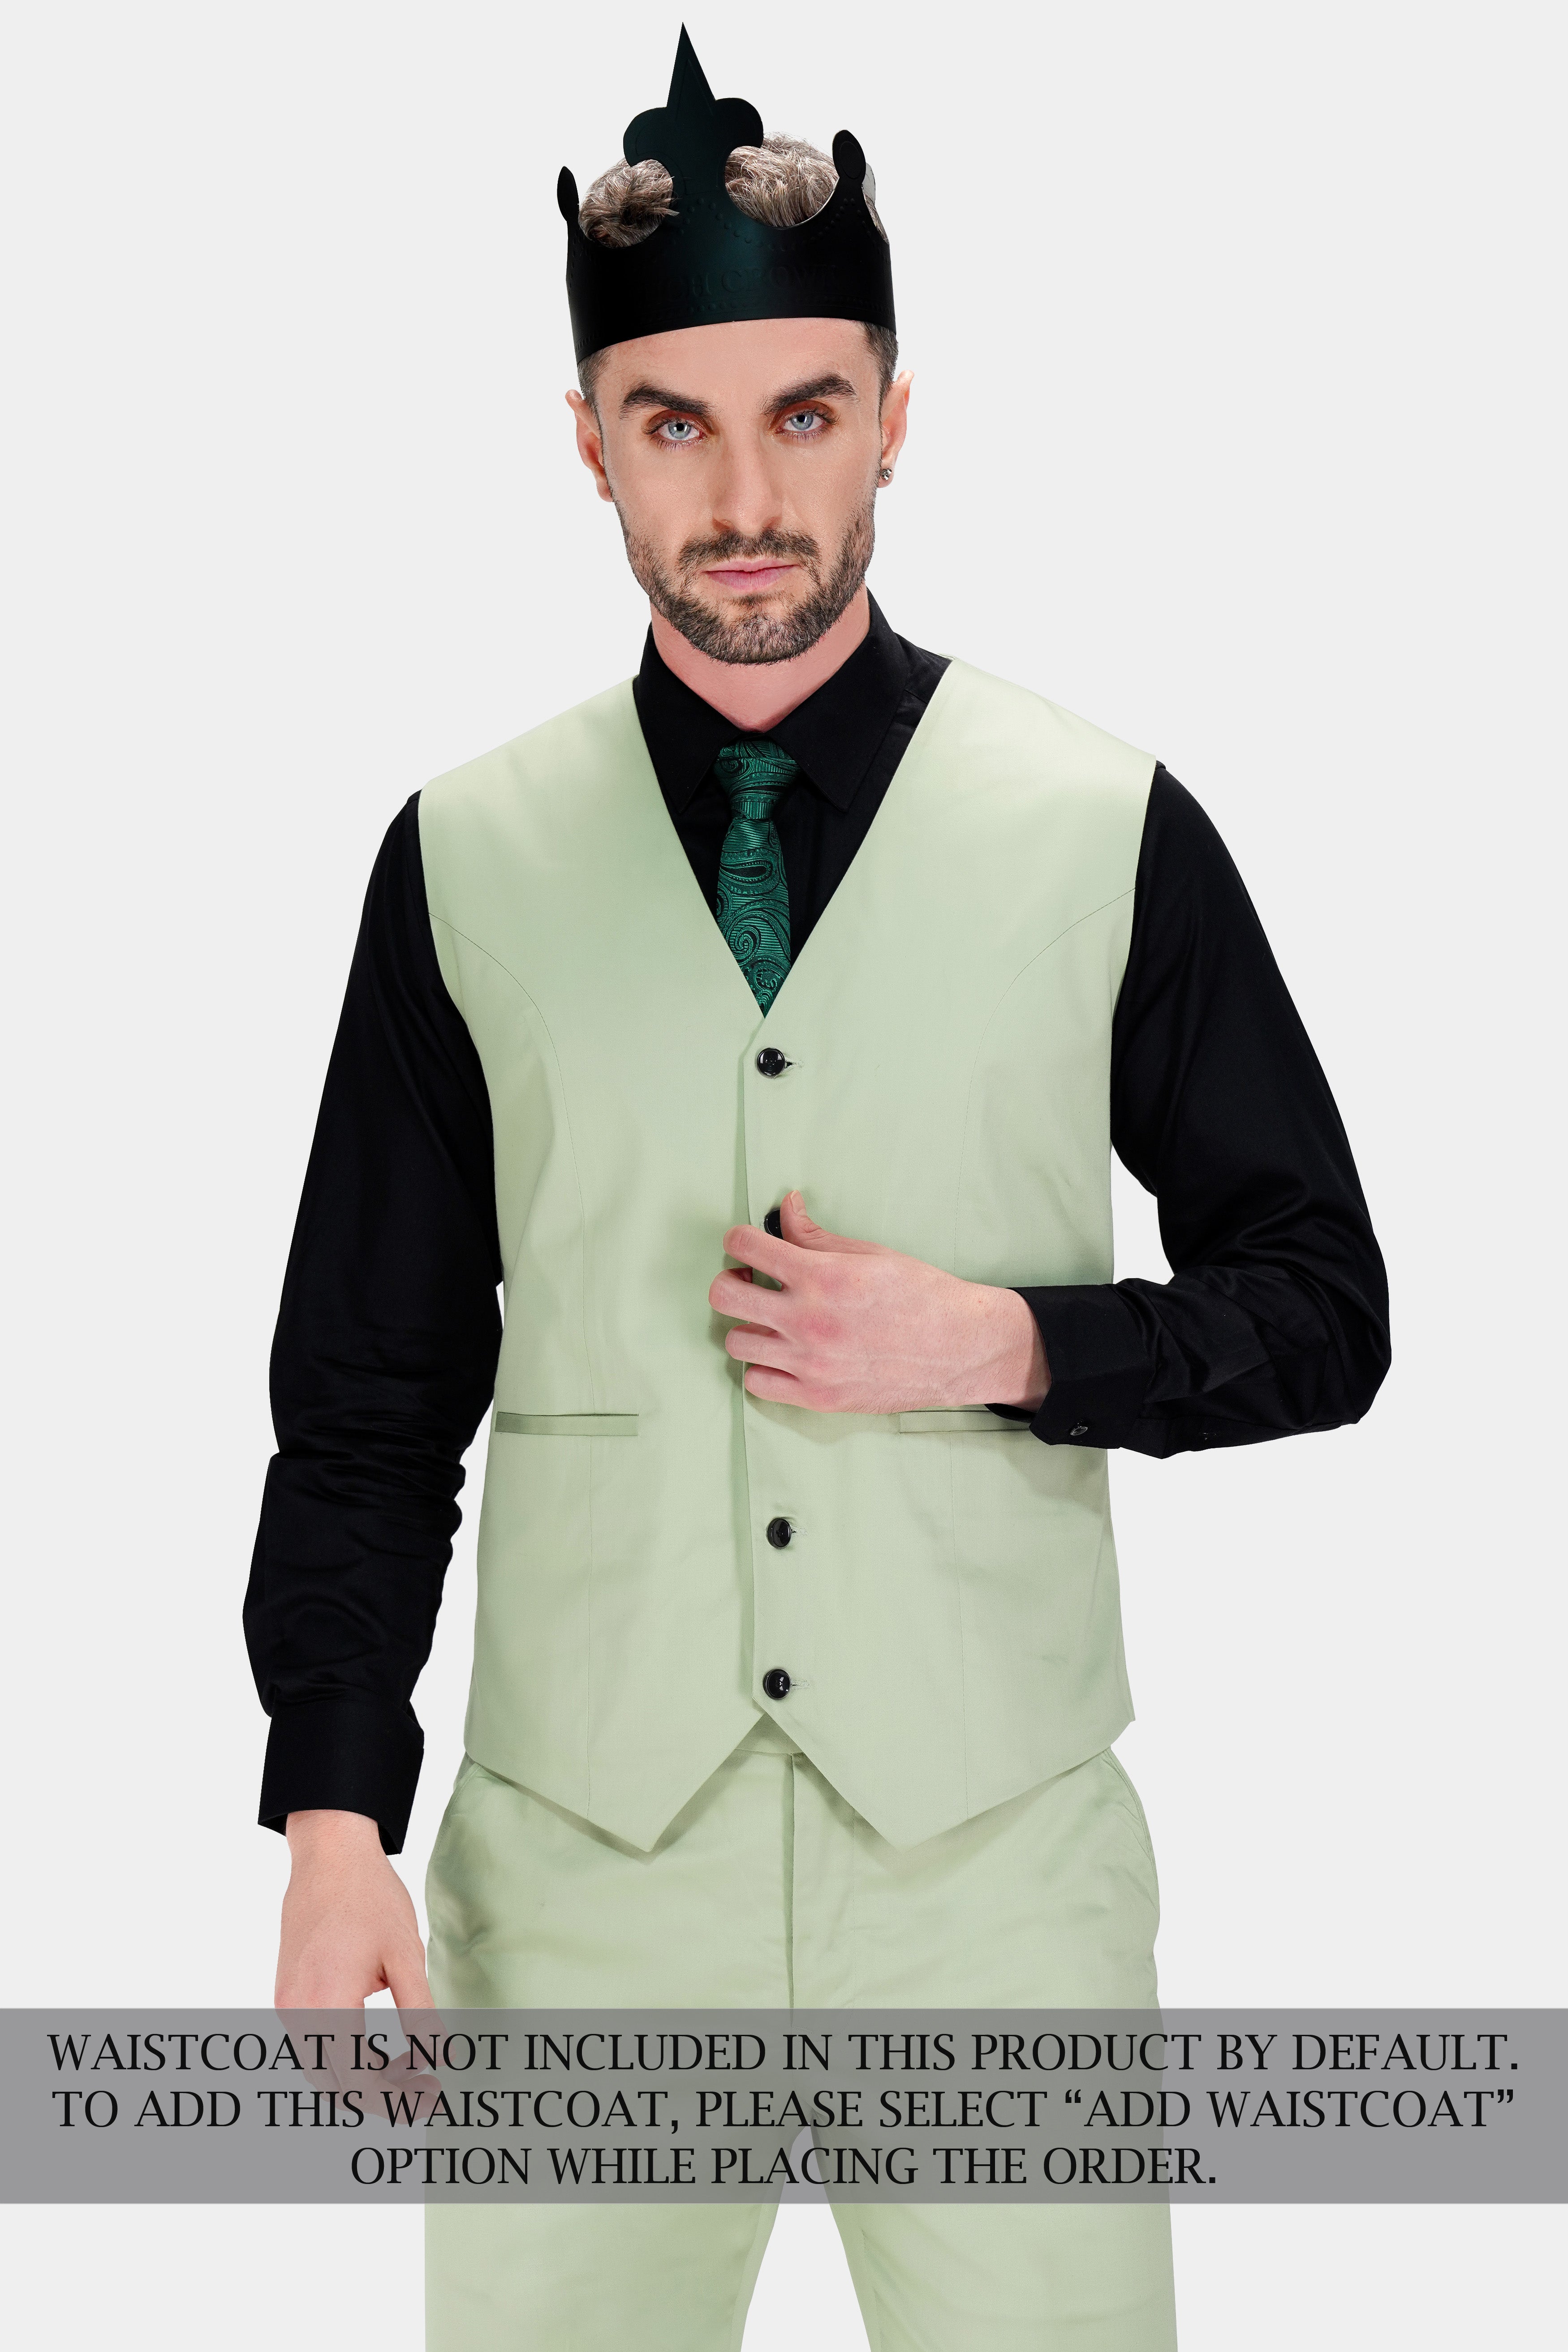 Coriander Green Double Breasted Premium Cotton Stretchable Traveler Suit ST2793-DB-36,ST2793-DB-38,ST2793-DB-40,ST2793-DB-42,ST2793-DB-44,ST2793-DB-46,ST2793-DB-48,ST2793-DB-50,ST2793-DB-52,ST2793-DB-54,ST2793-DB-56,ST2793-DB-58,ST2793-DB-60